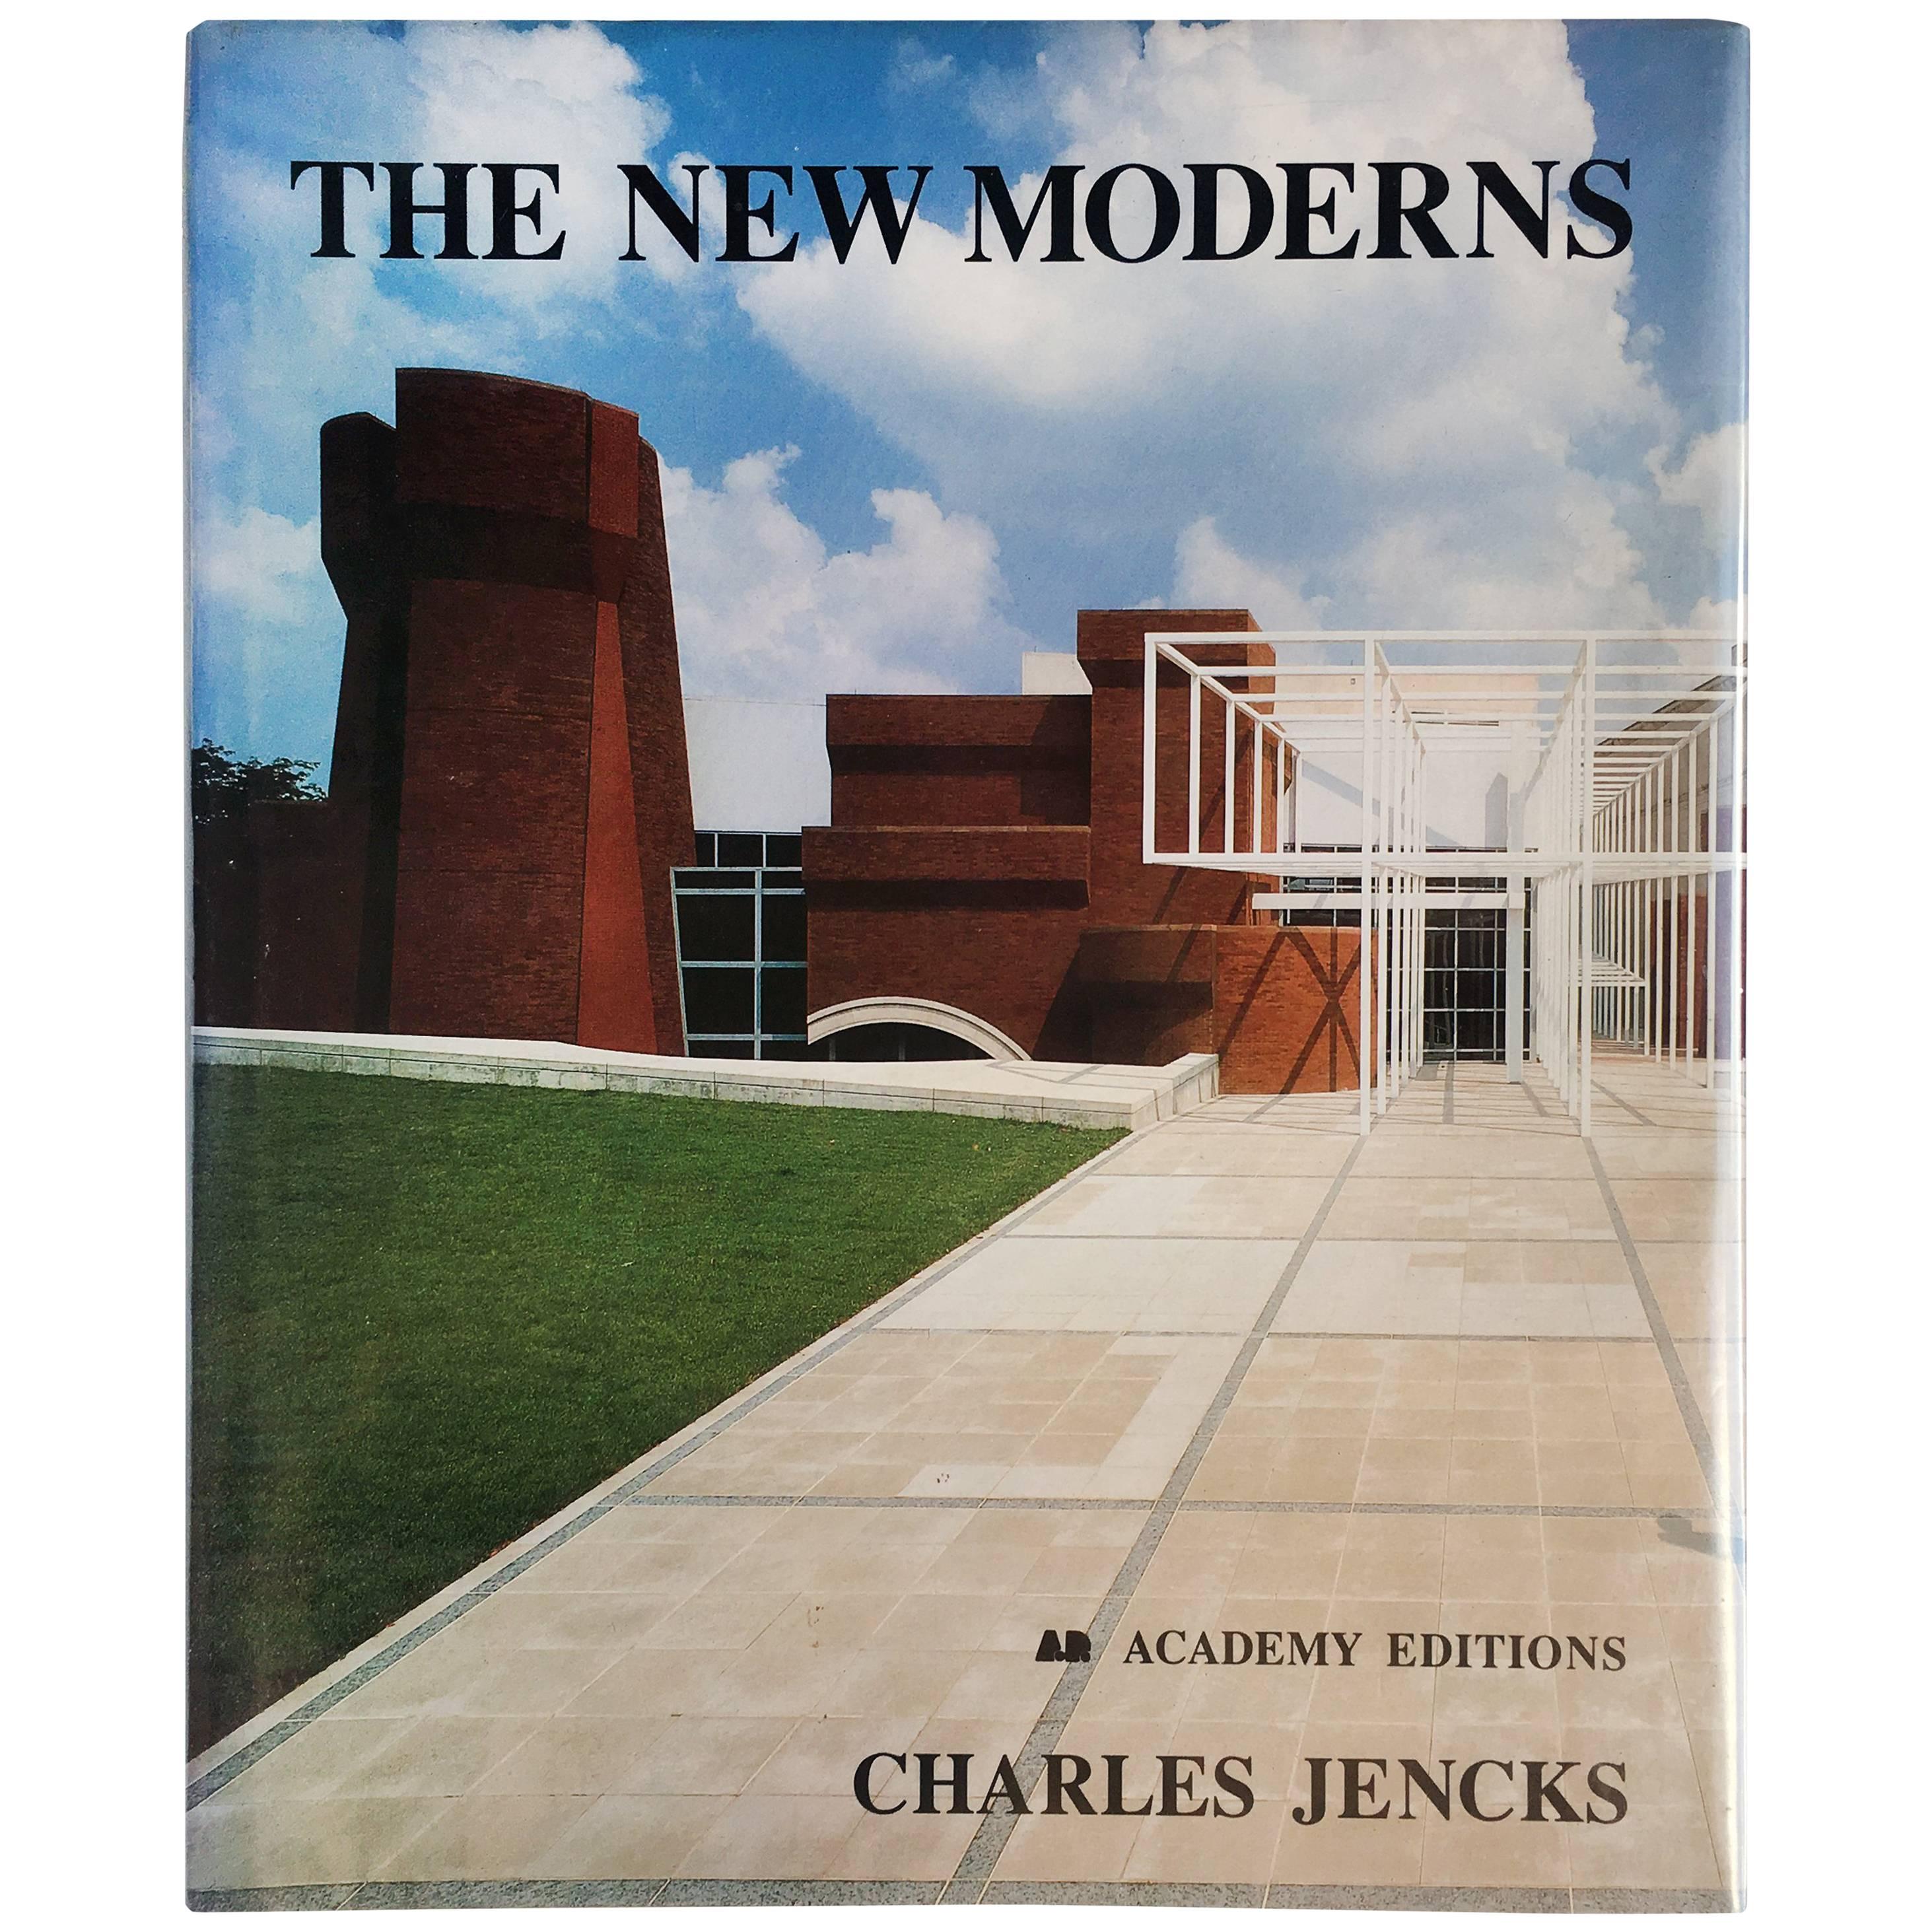 "The New Moderns - Charles Jencks " Book, First Edition, 1990